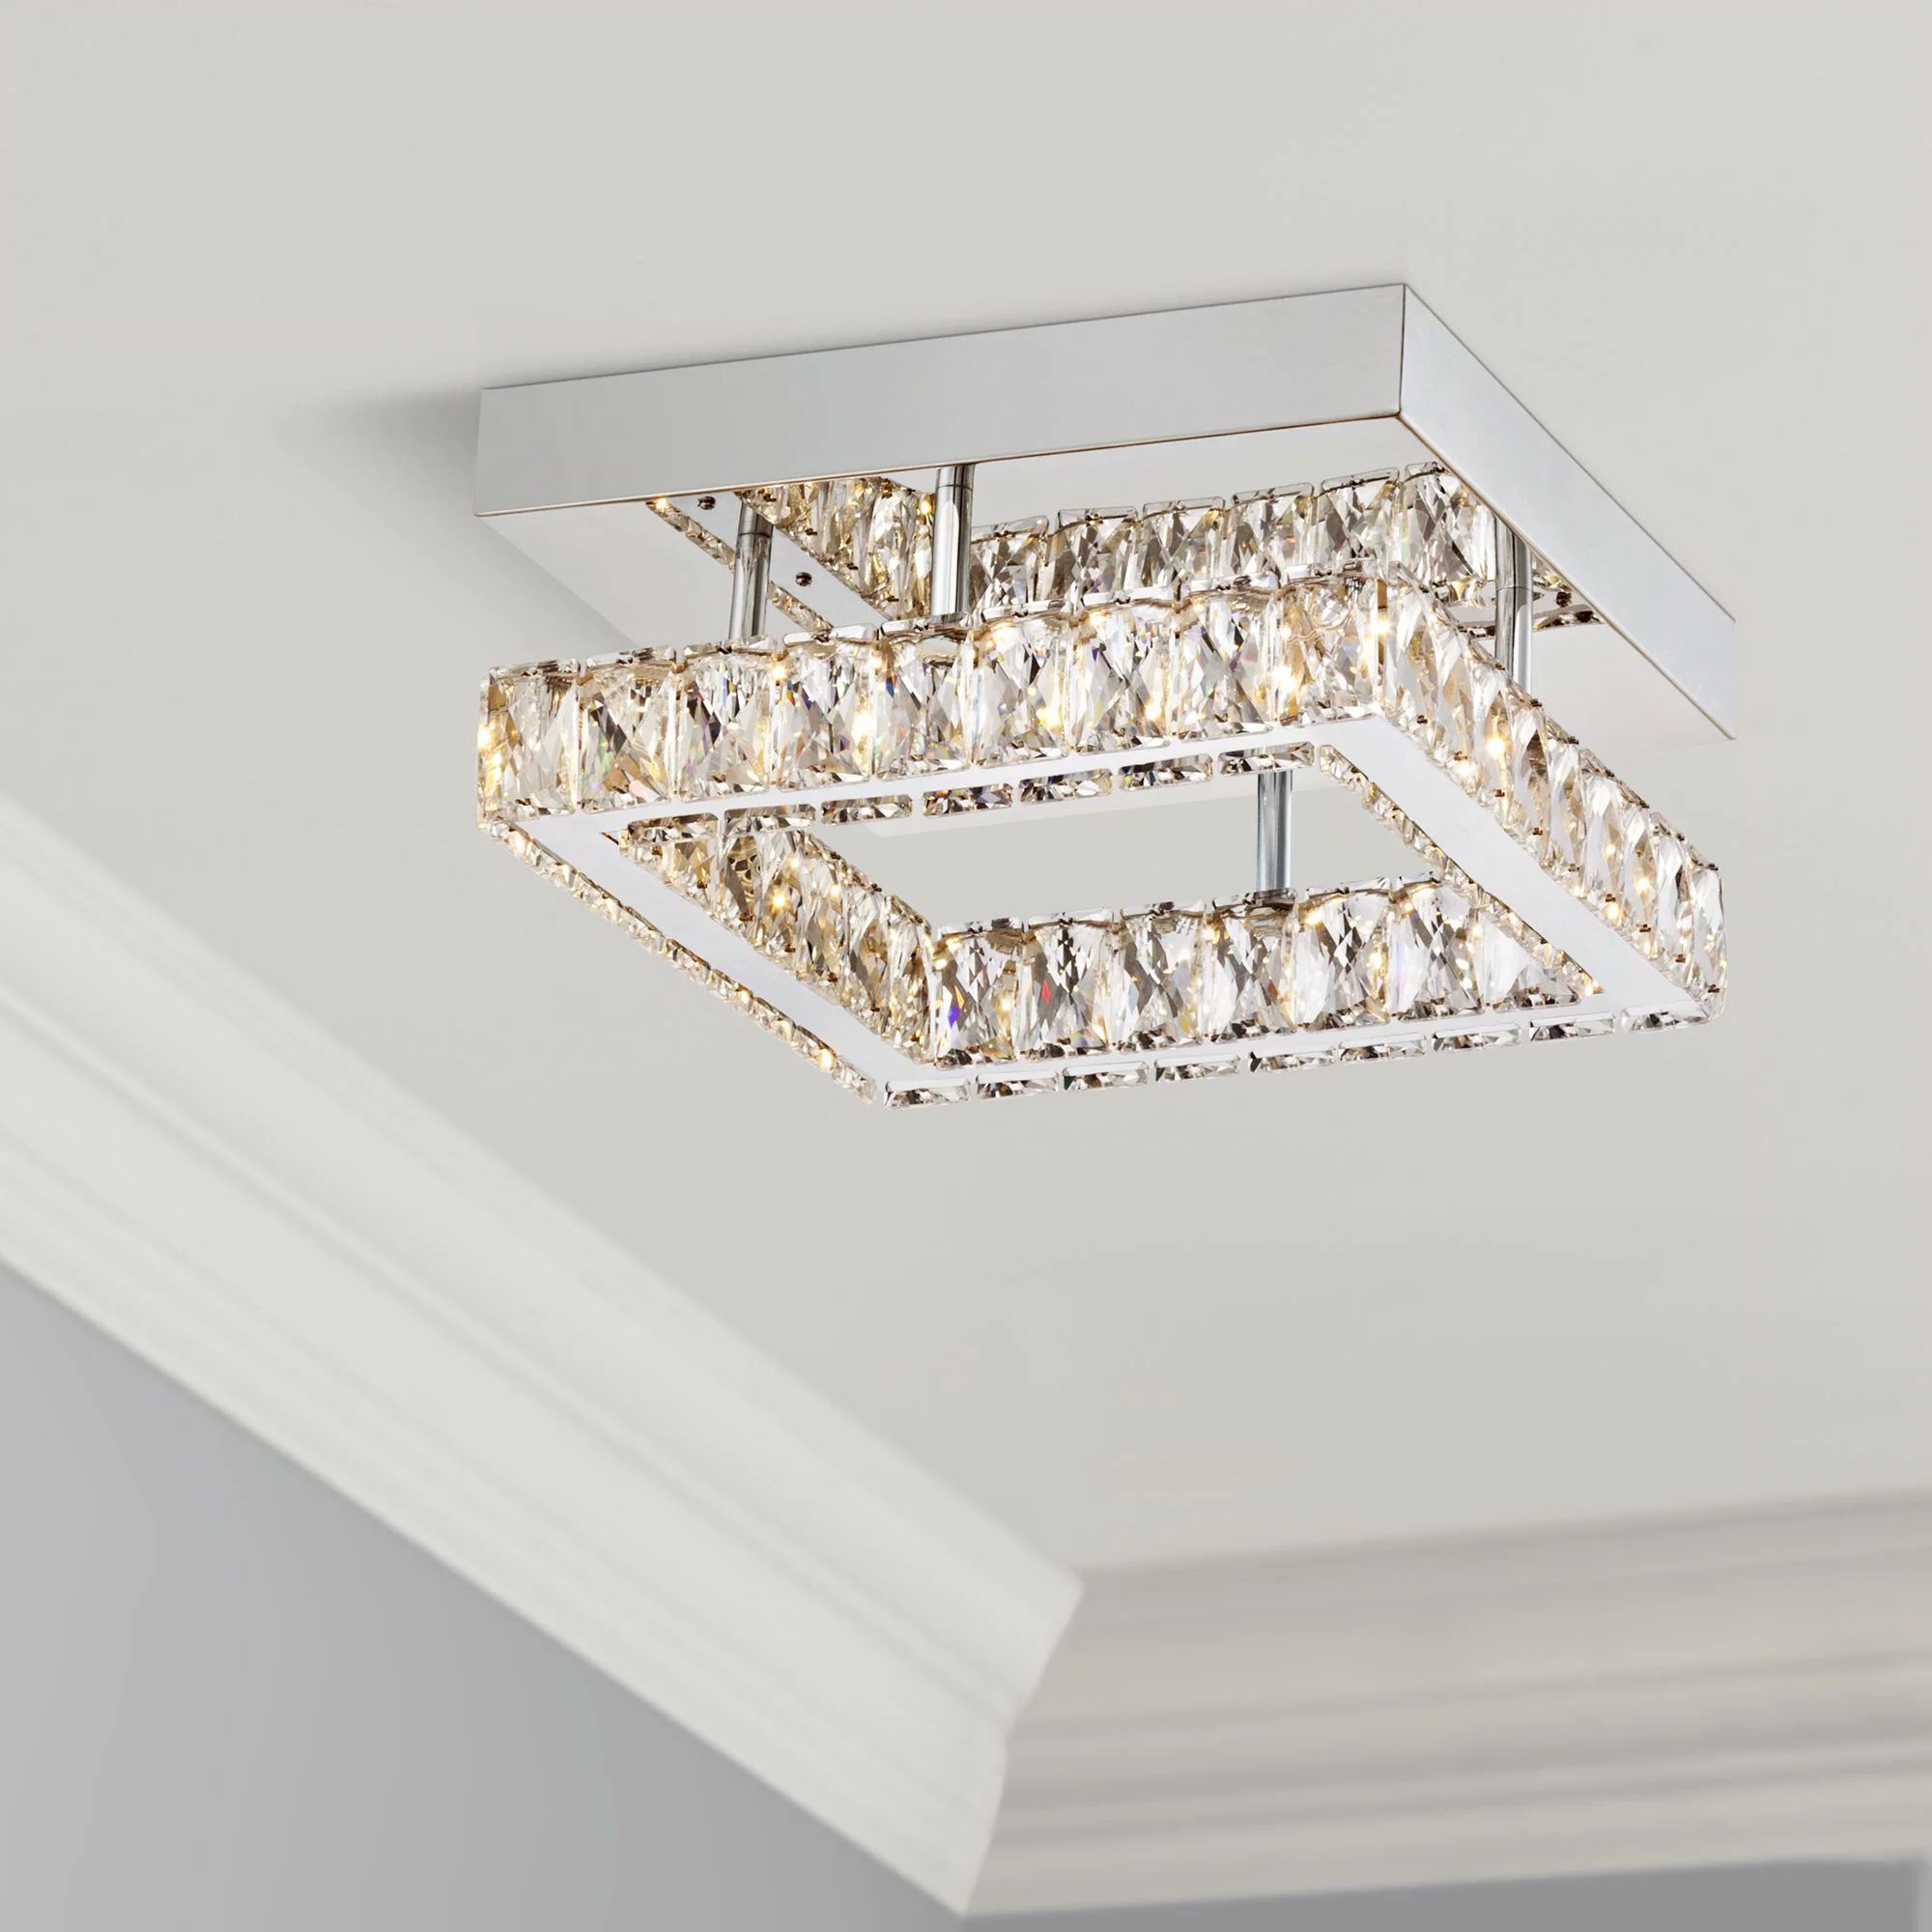 Widely Used Possini Euro Design Modern Ceiling Light Flush Mount Throughout Chrome And Crystal Led Chandeliers (View 18 of 20)